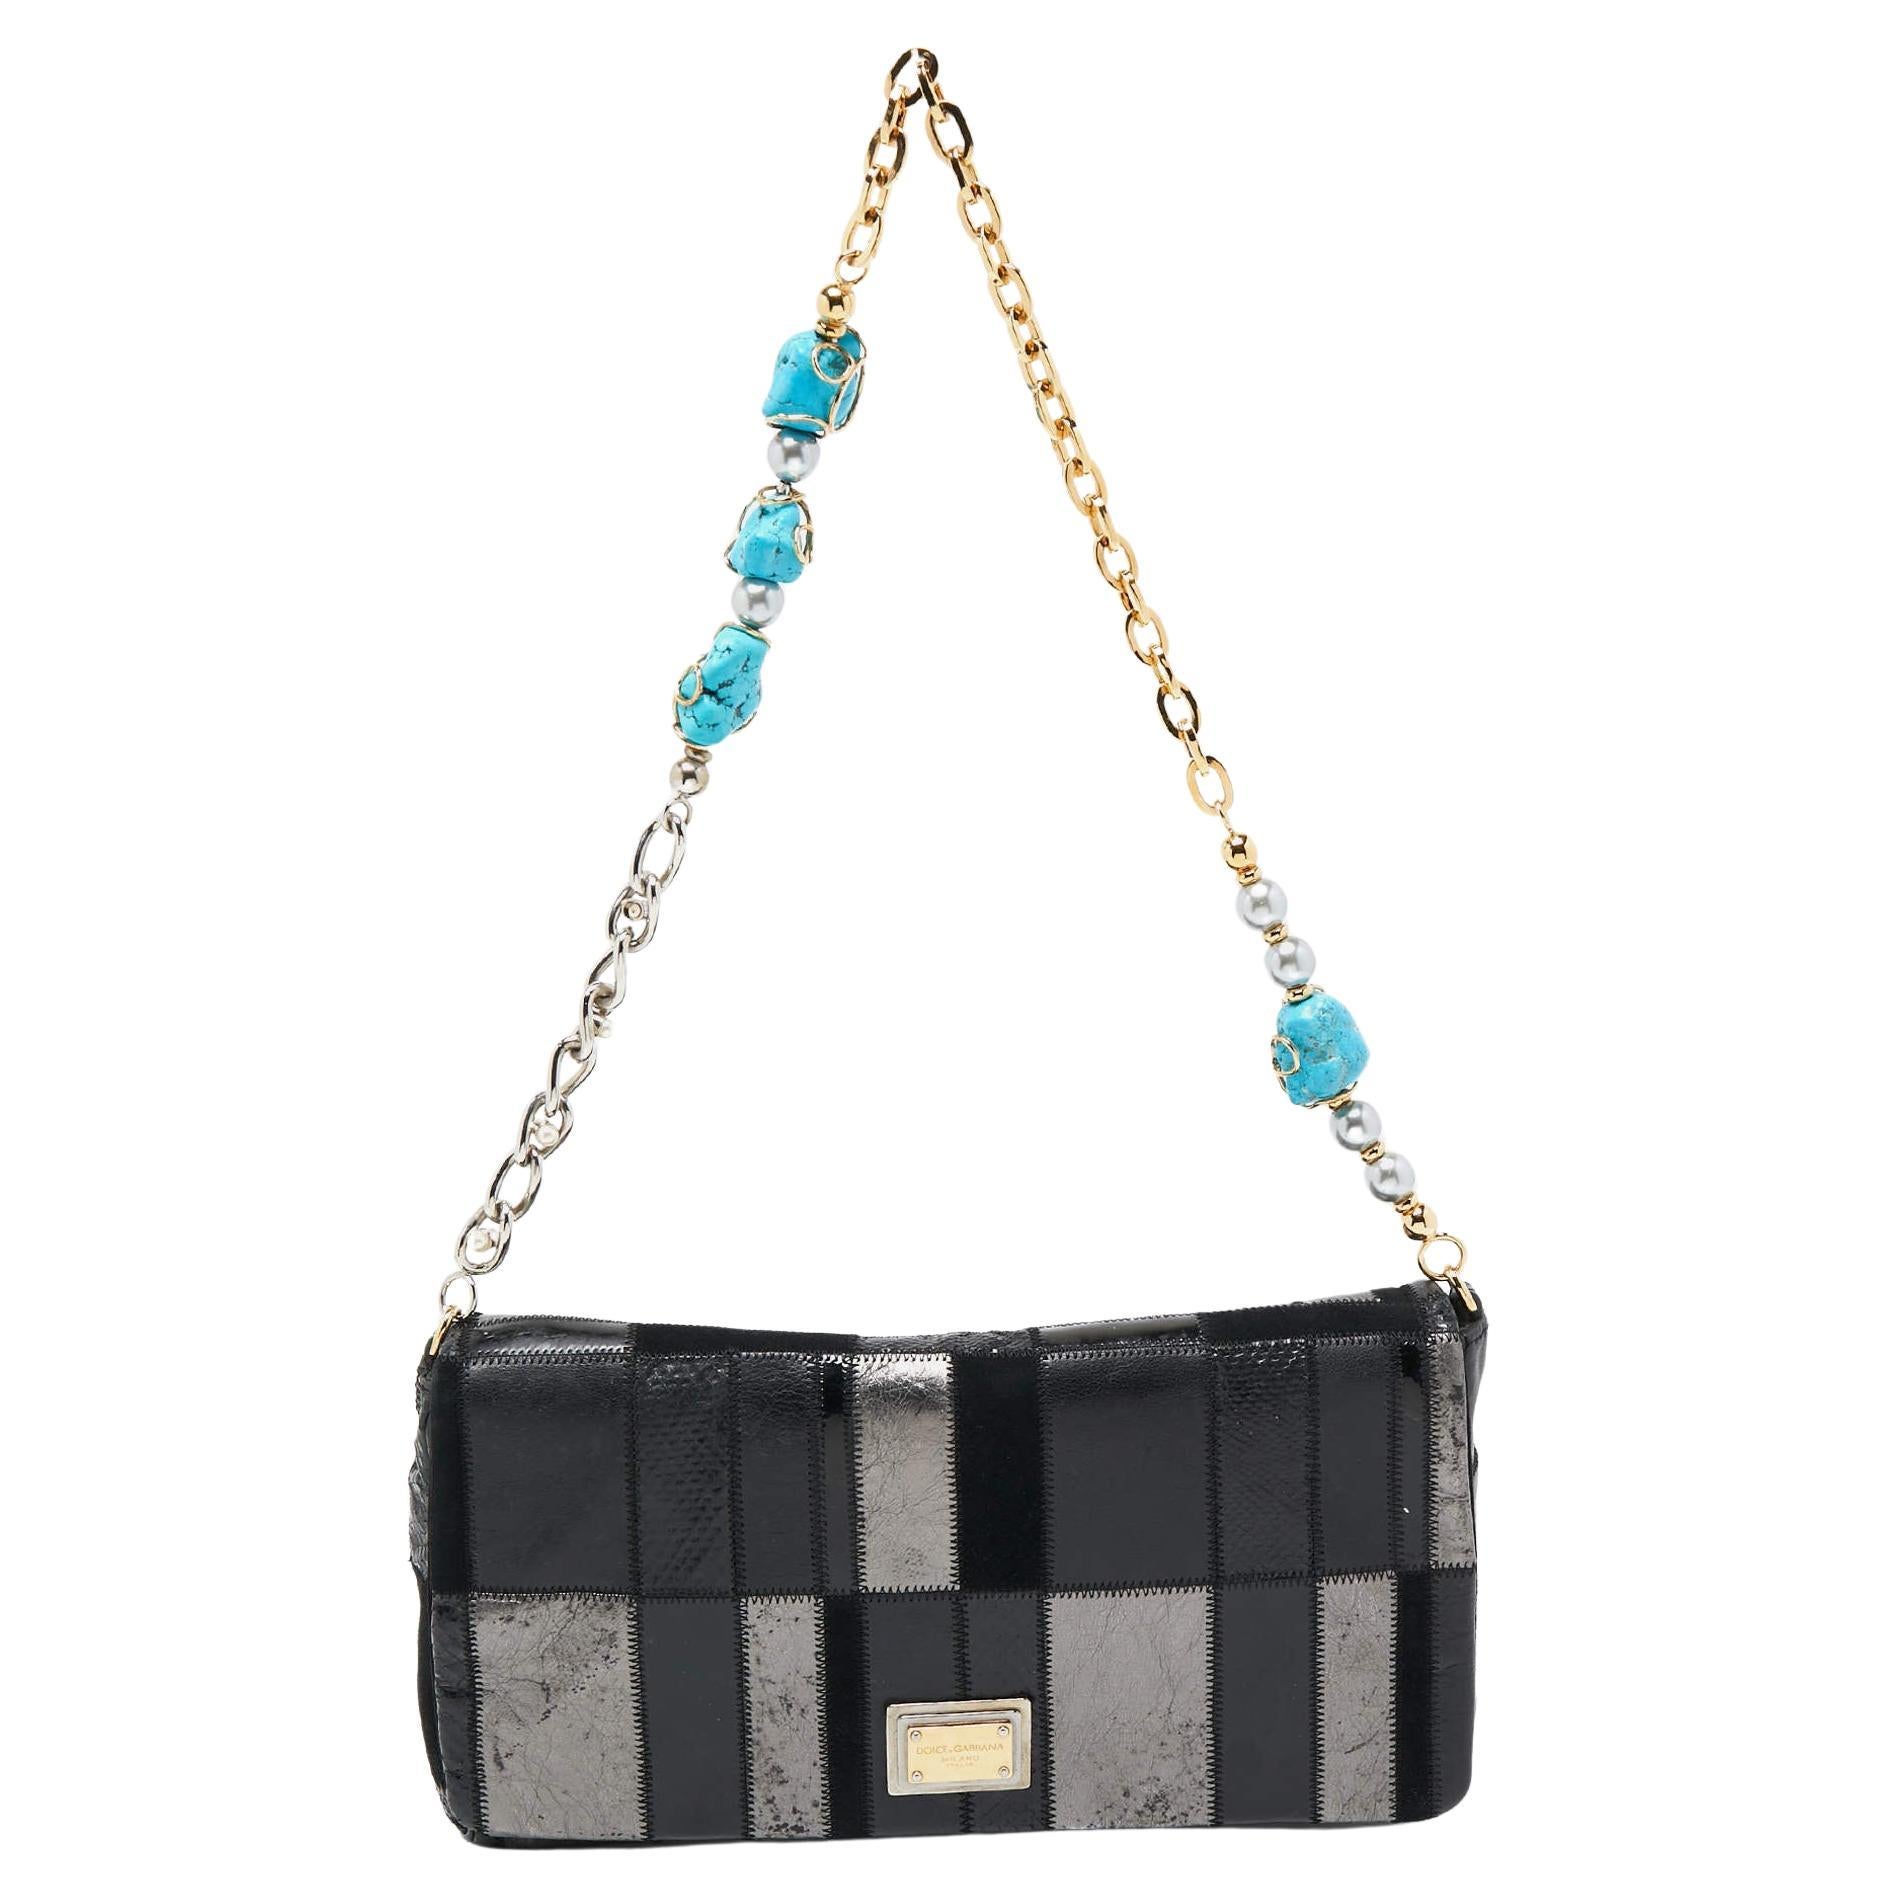 Dolce & Gabbana Black/Grey Mixed Leather and Snakeskin Patchwork Chain Bag For Sale